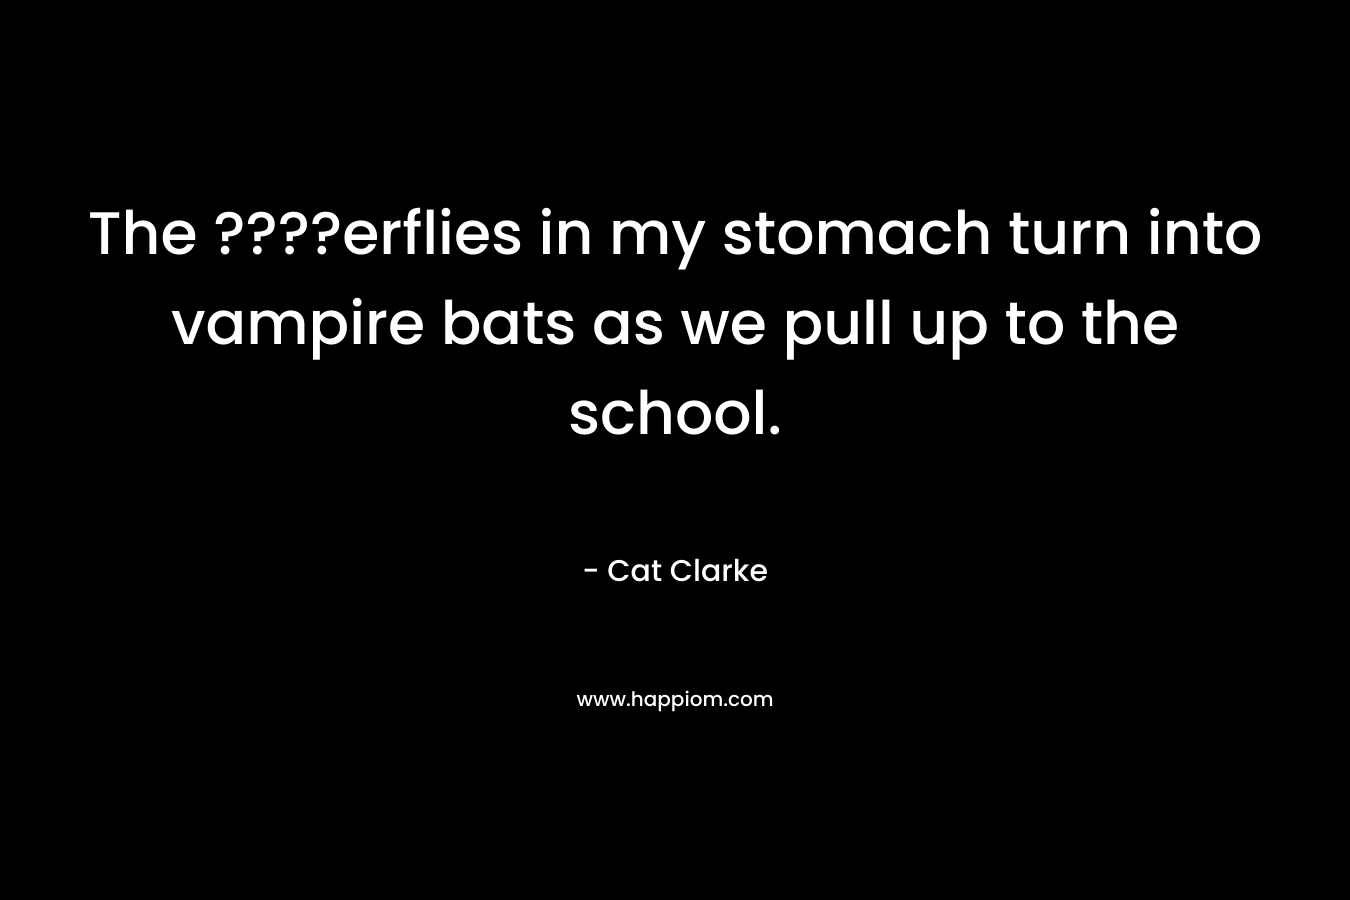 The ????erflies in my stomach turn into vampire bats as we pull up to the school. – Cat Clarke